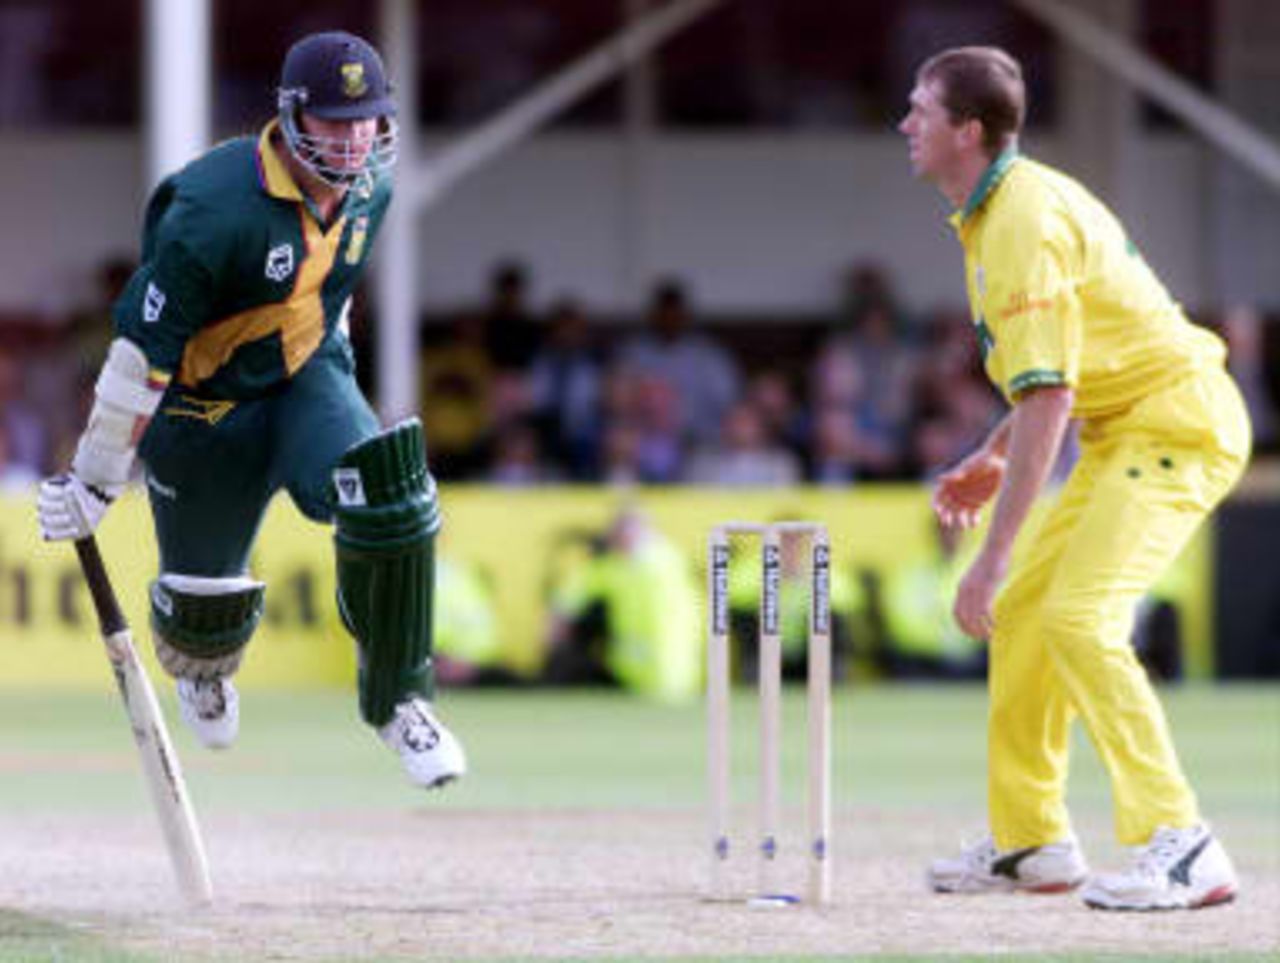 South Africa's Lance Klusener leaps to the crease to save his wicket before Australian's victory over South Africa during their semi-final match in the Cricket World Cup at Edgbaston, Birmingham, 17 June 1999.